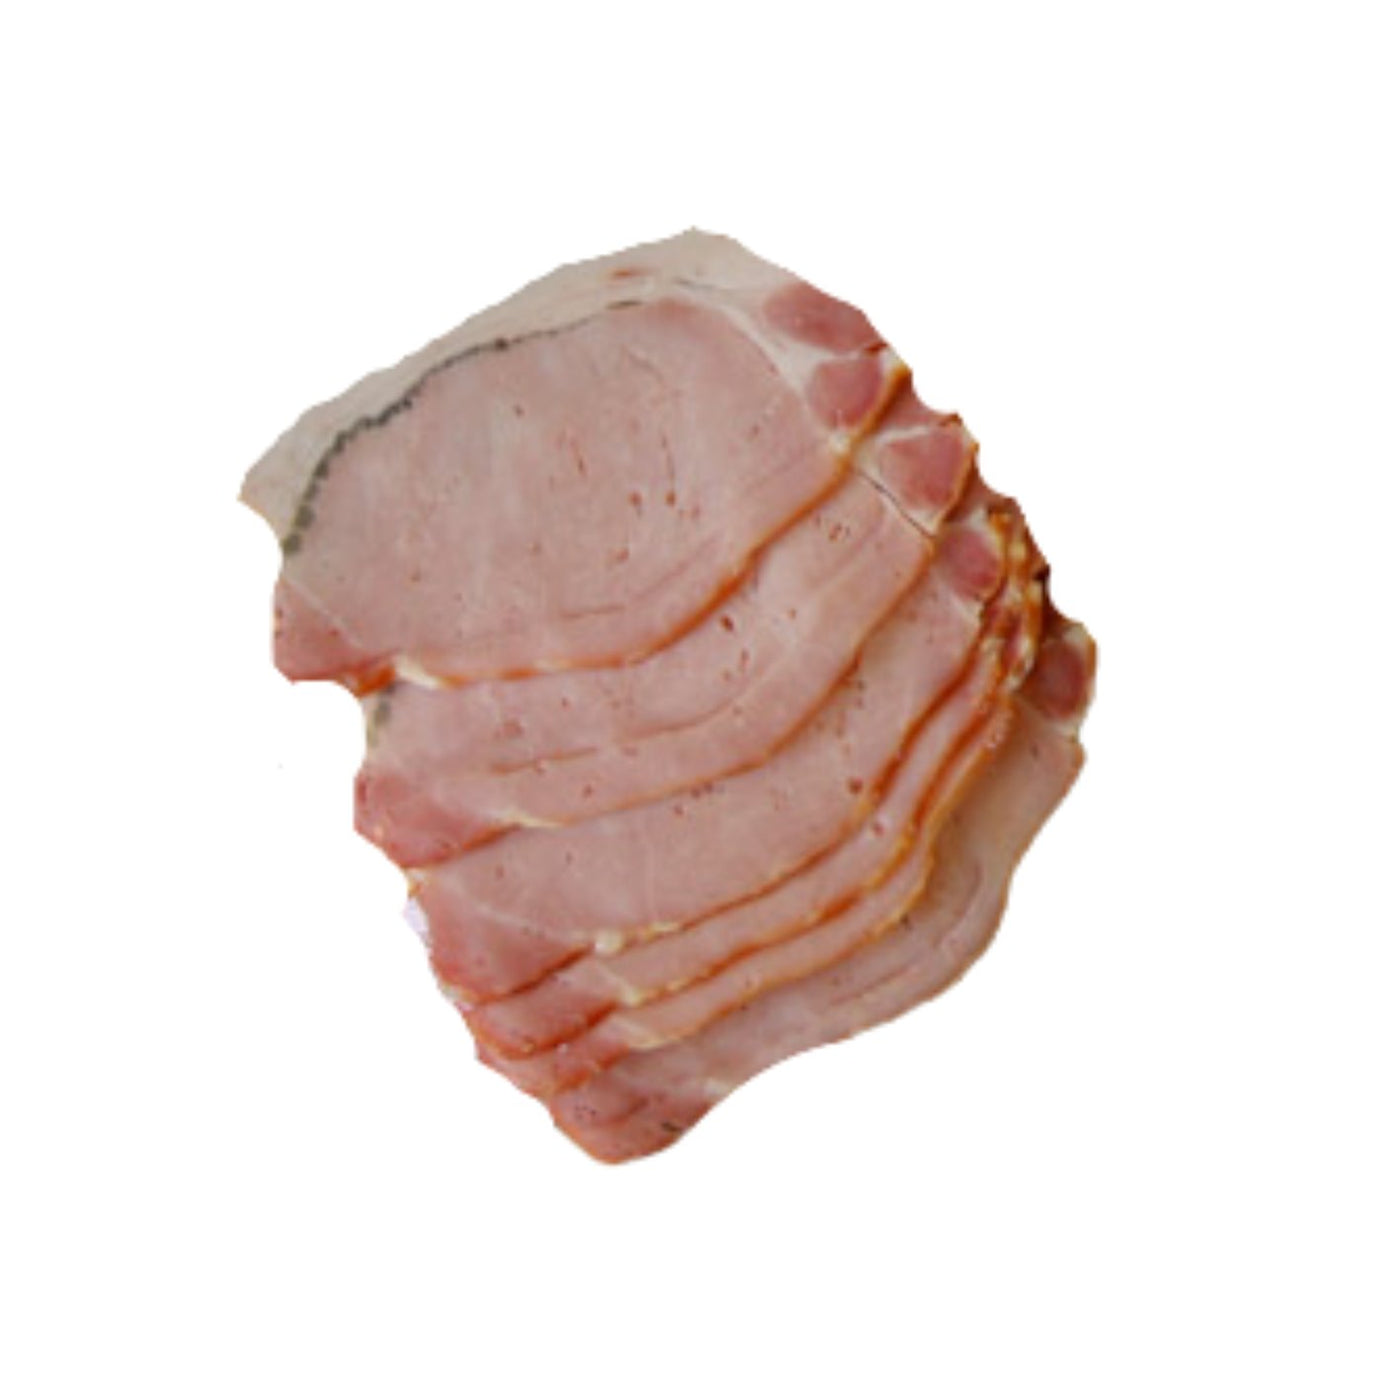 Gilly's Wood Smoked Rindless Eye Bacon | $29.99kg